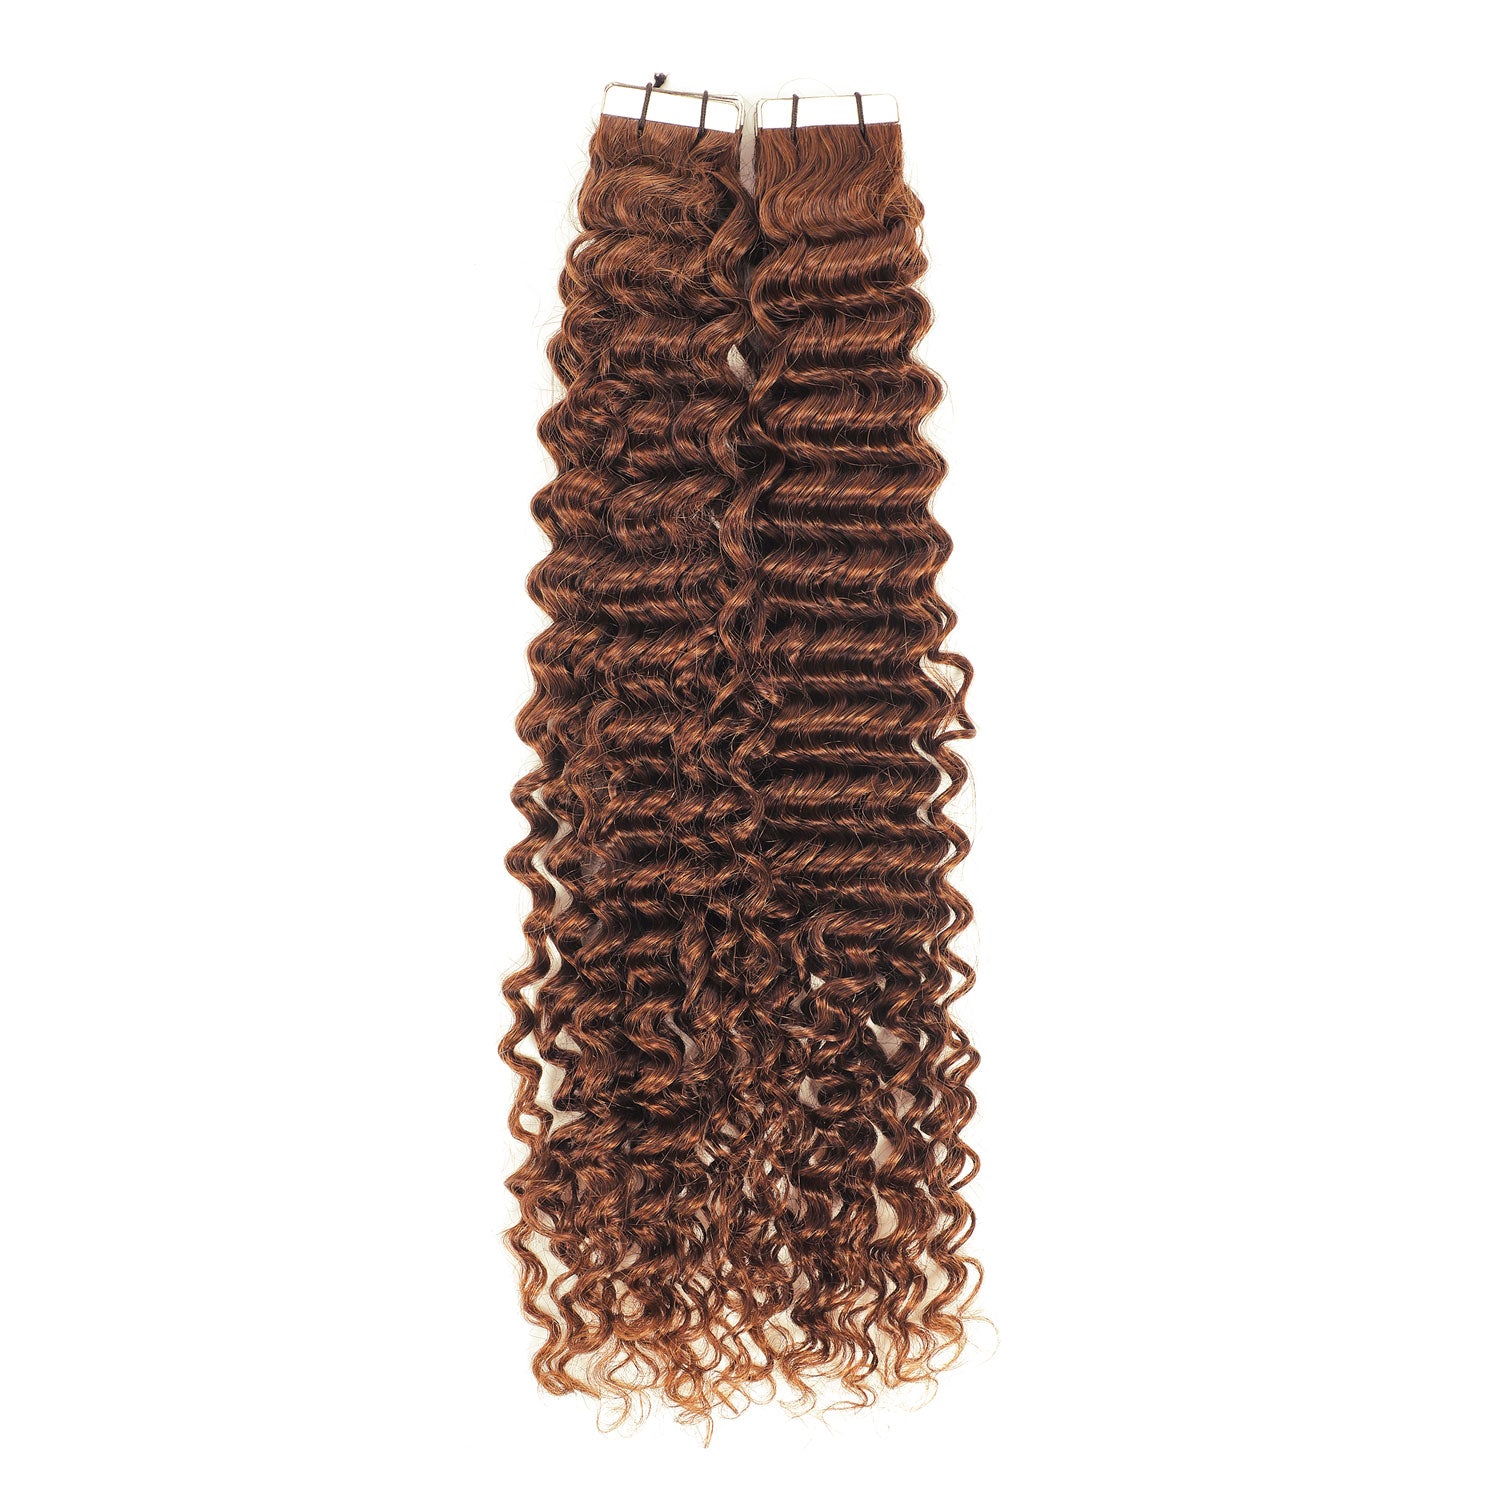 Curly Kinky Tape Hair Extensions  #30 Medium Copper